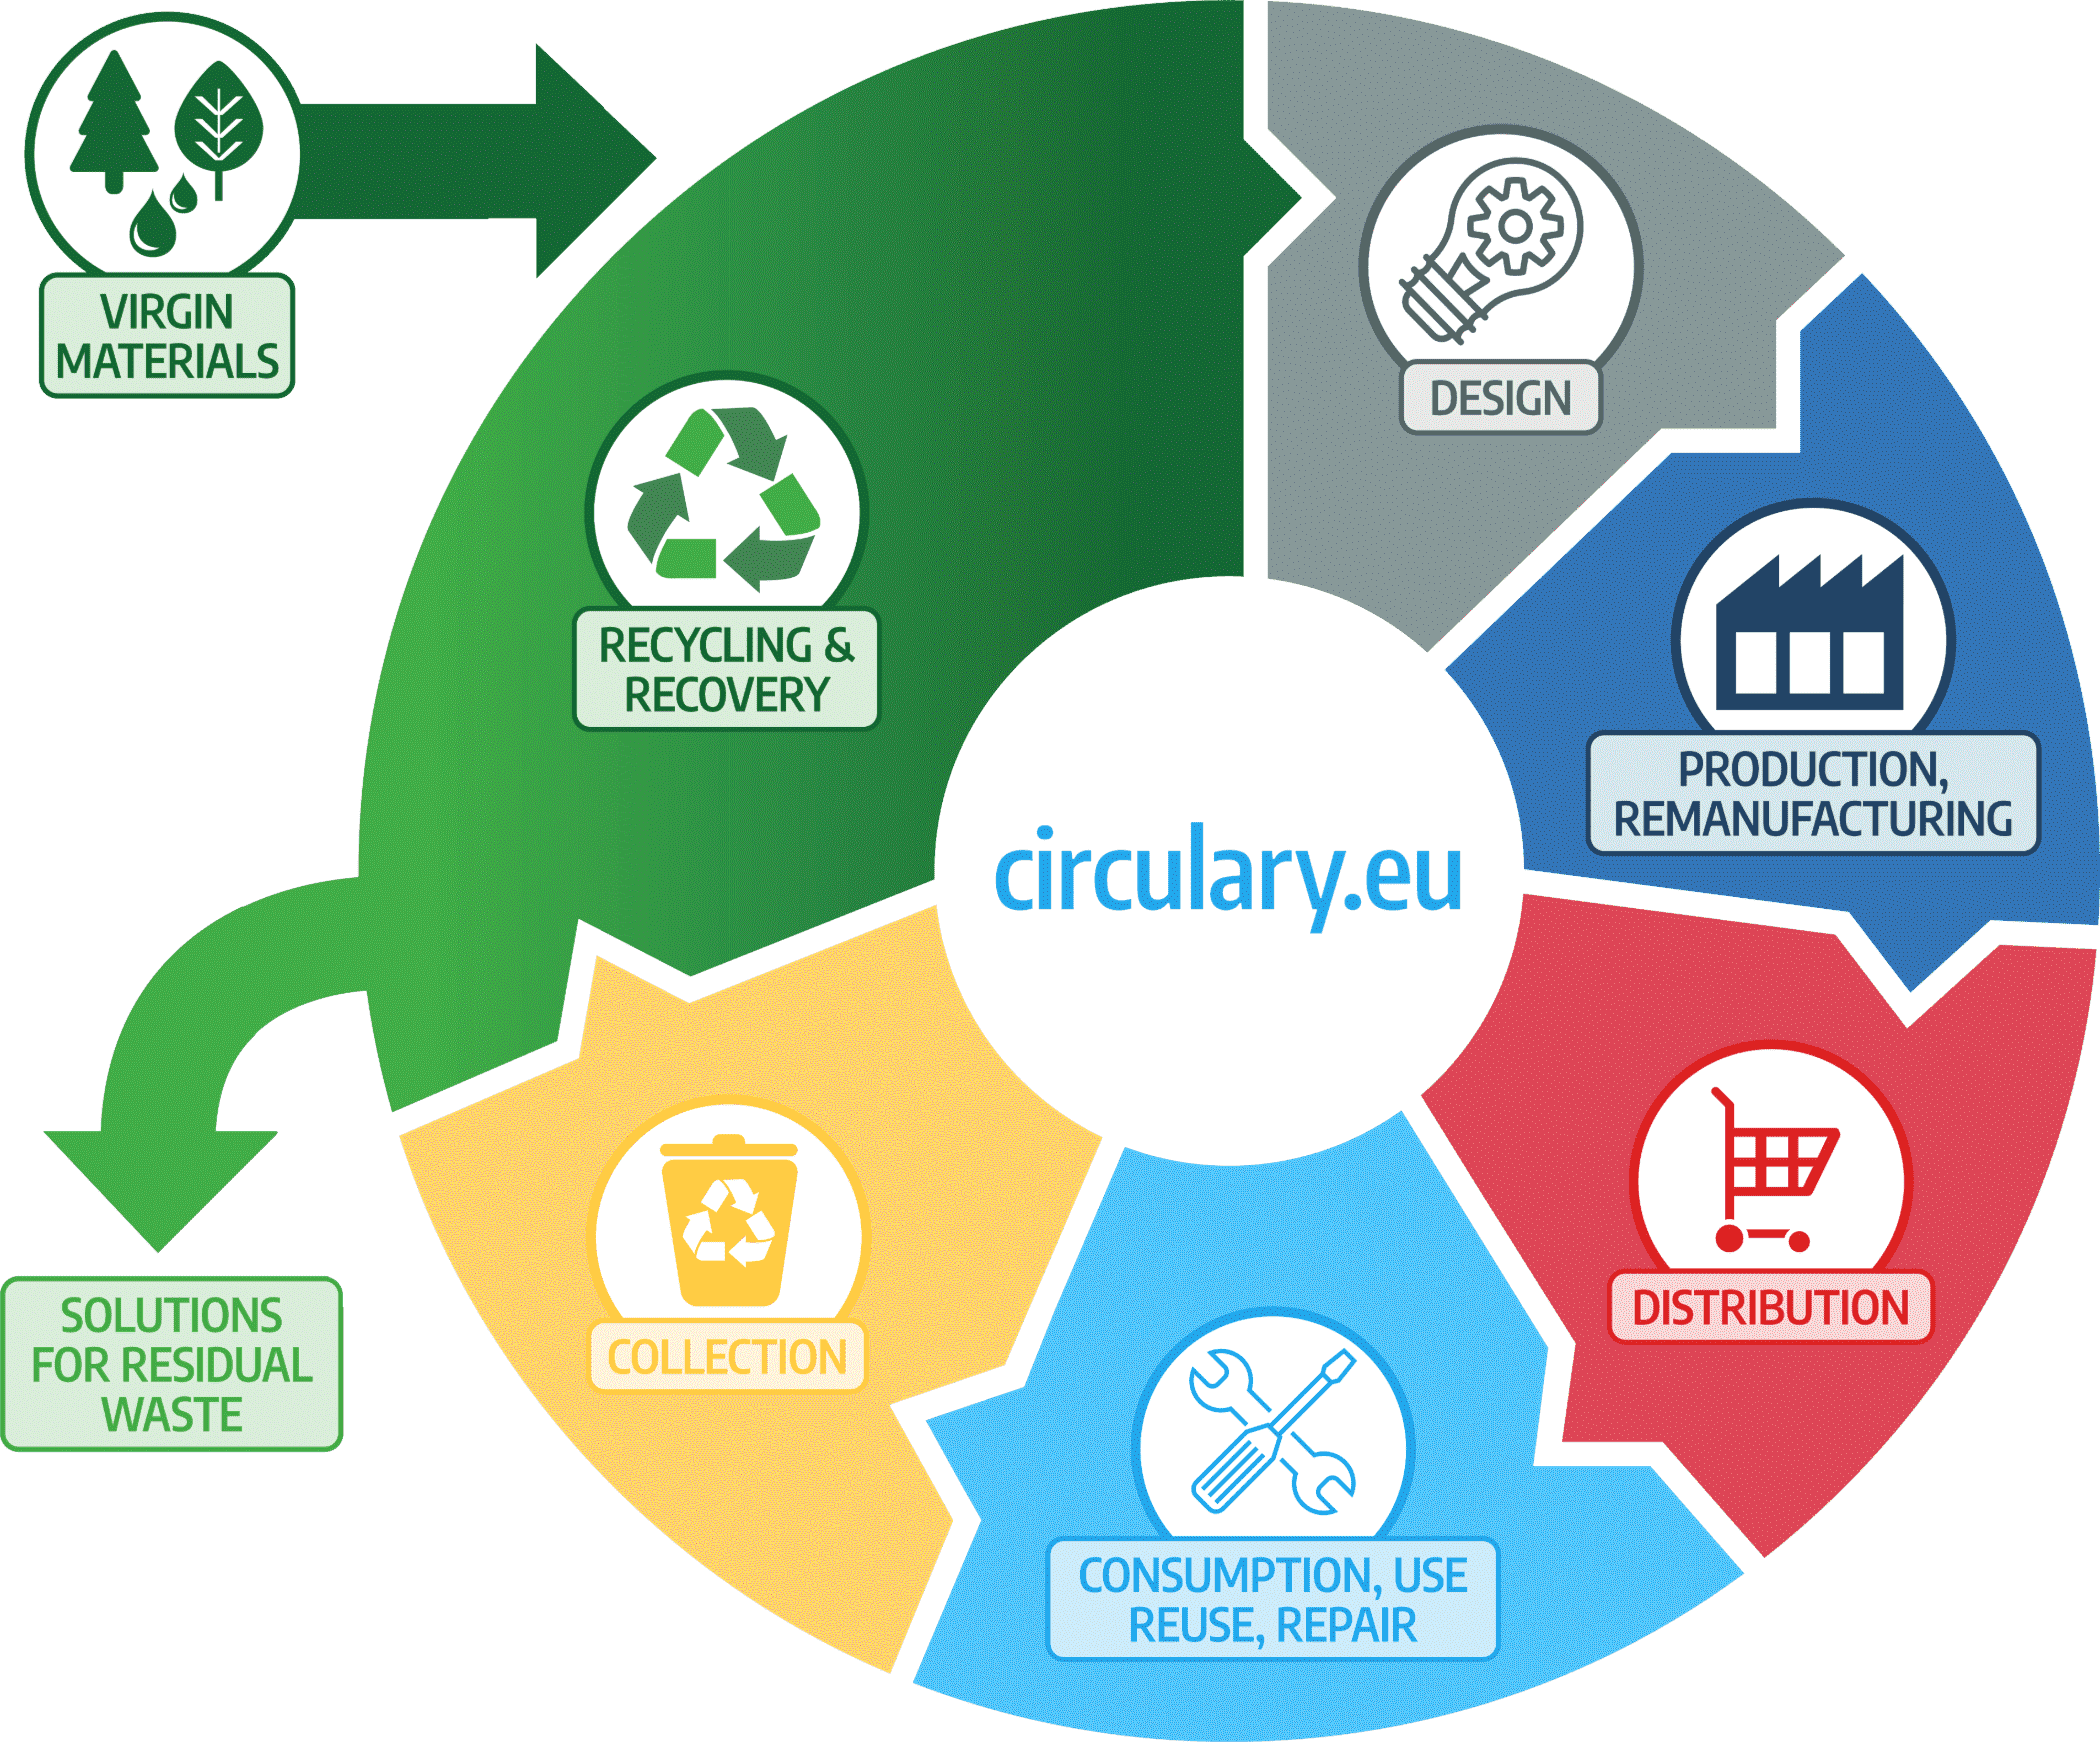 Circular economy graphic: Virgin materials in - design - production, remanufacturing - distribution - consumption, use, reuse, repair - collection - recycling and recovery - solutions for residual waste